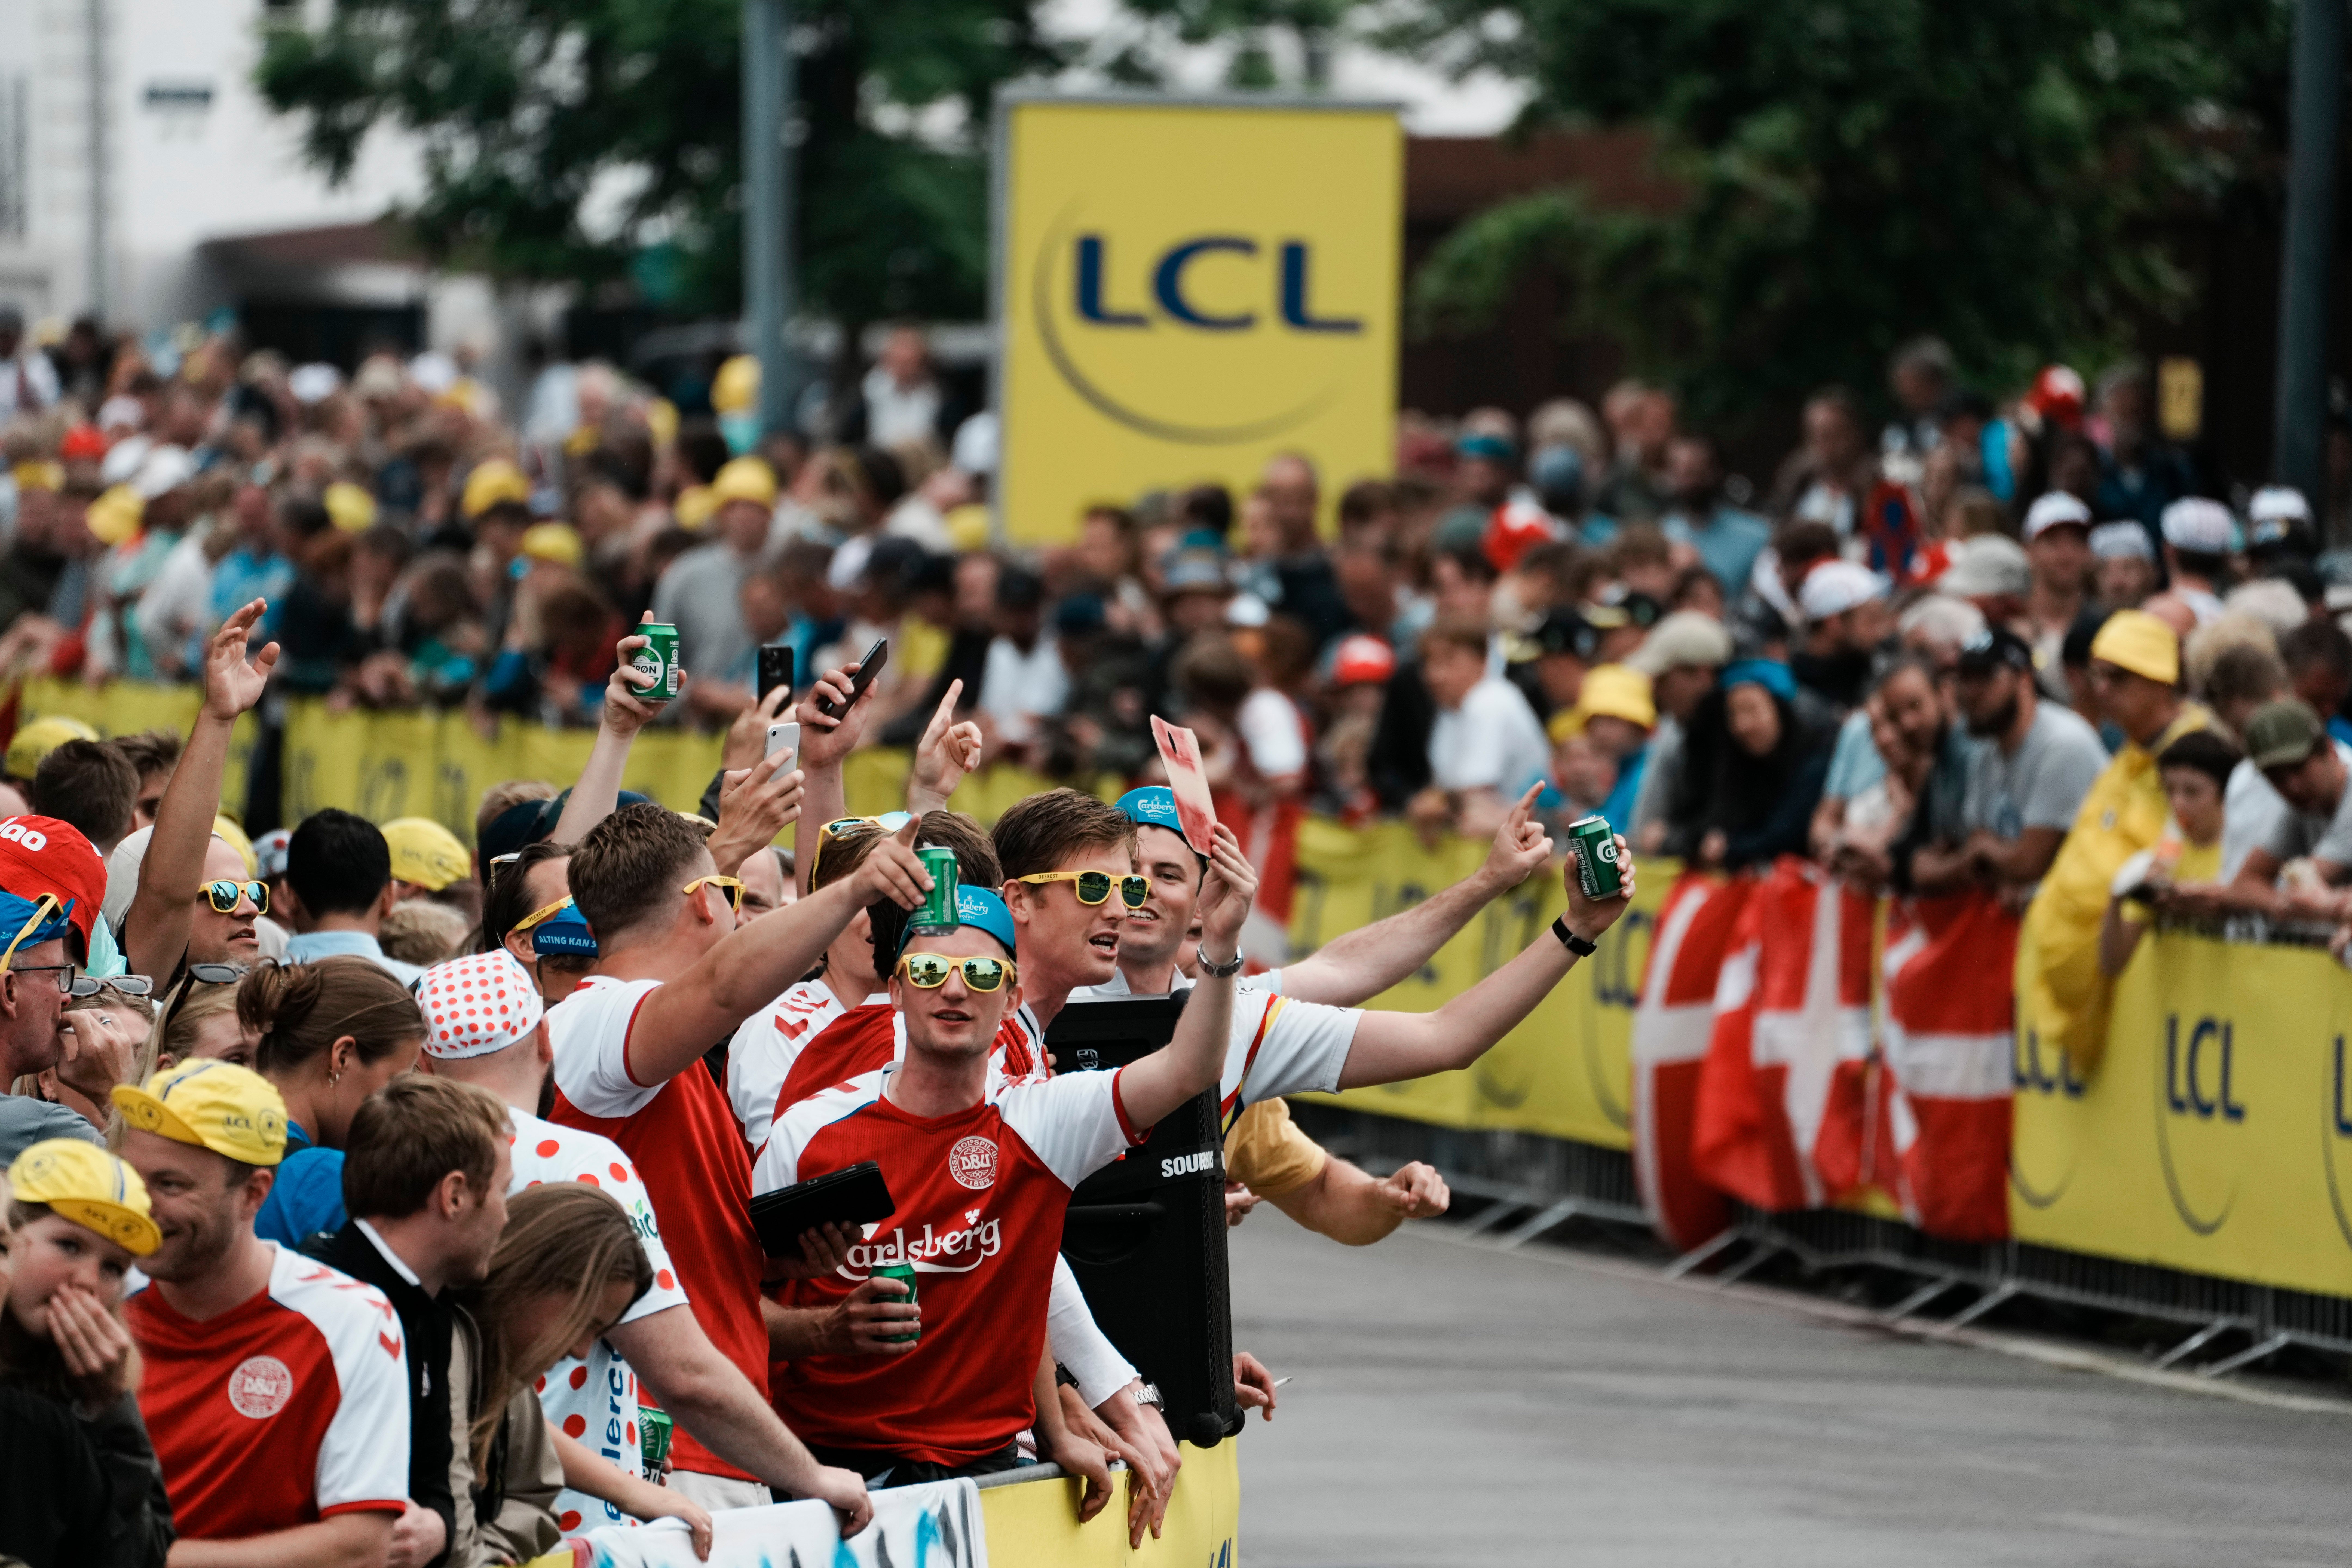 Fans cheer prior to the first stage of the 2022 Tour de France in Copenhagen